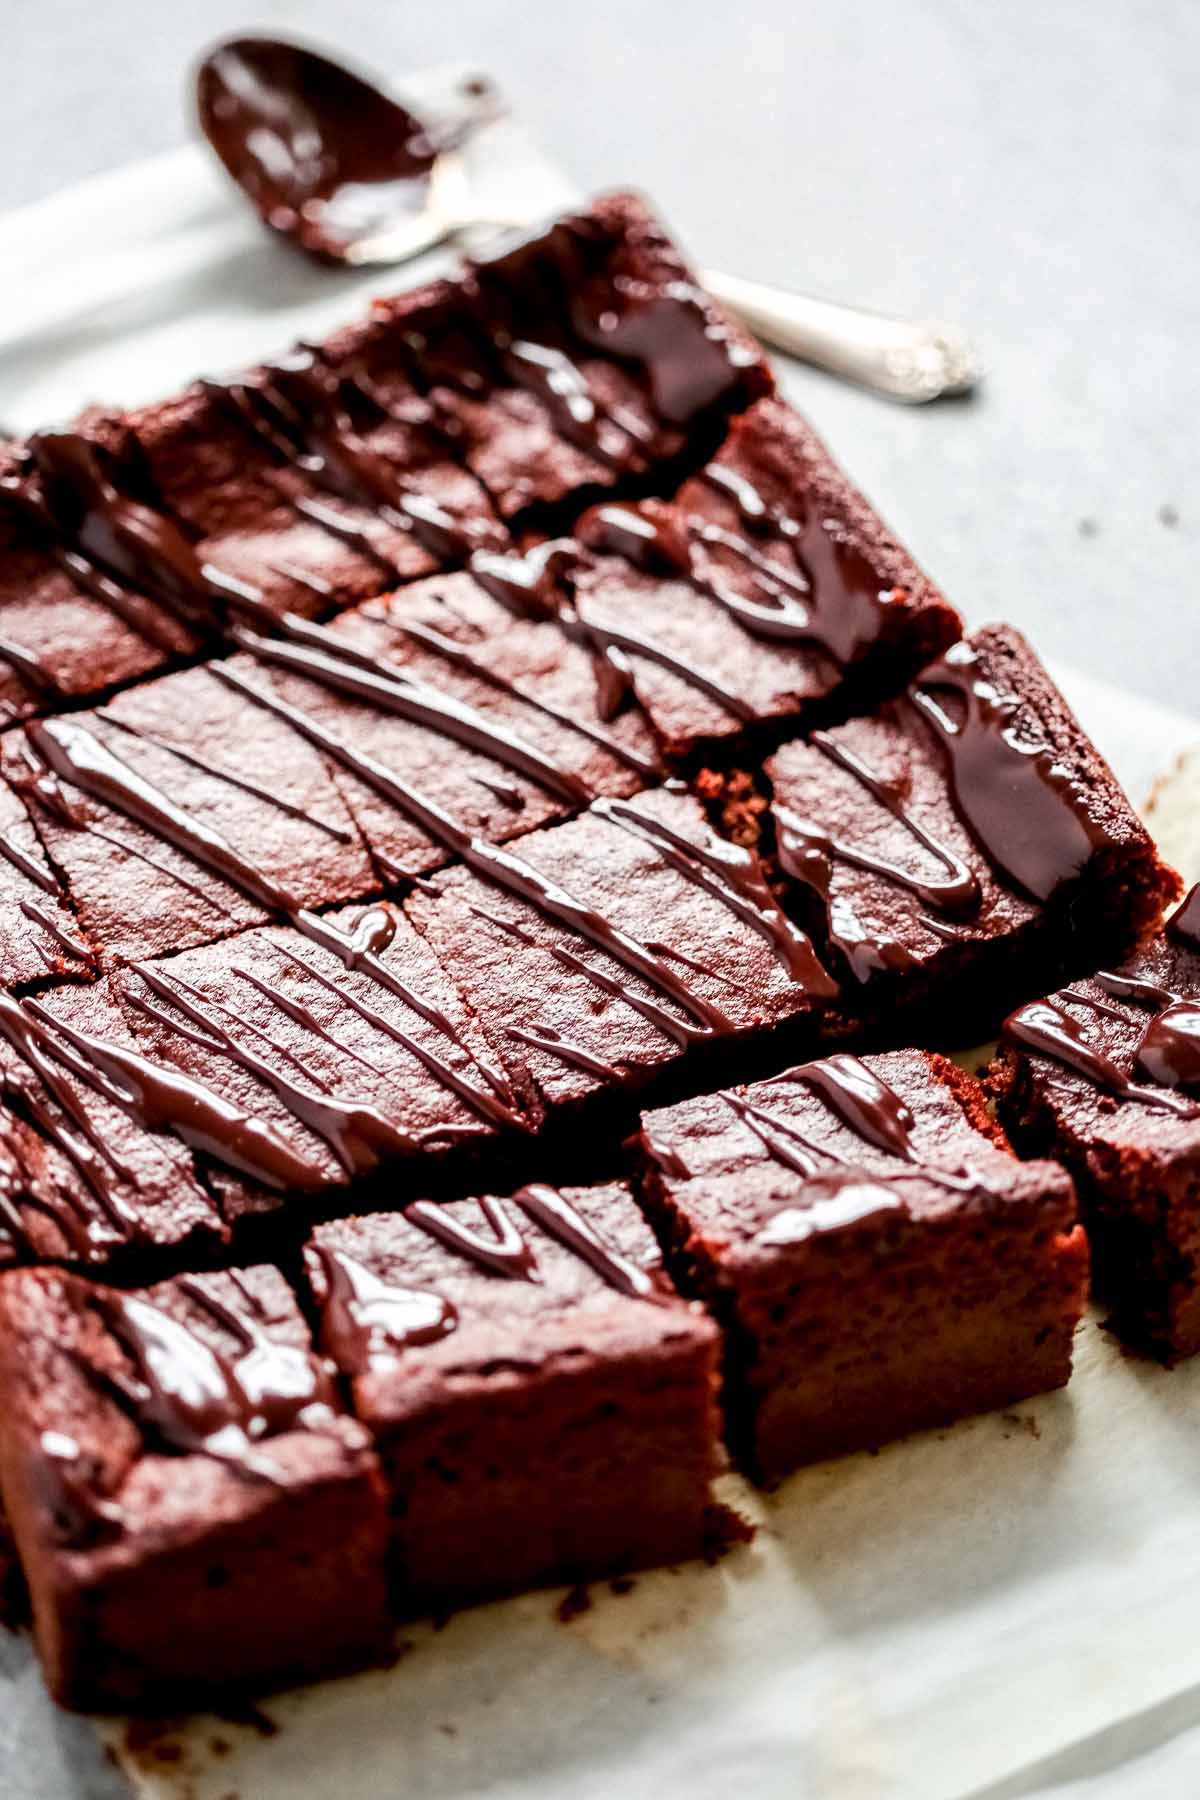 low-carb brownies cut into squares